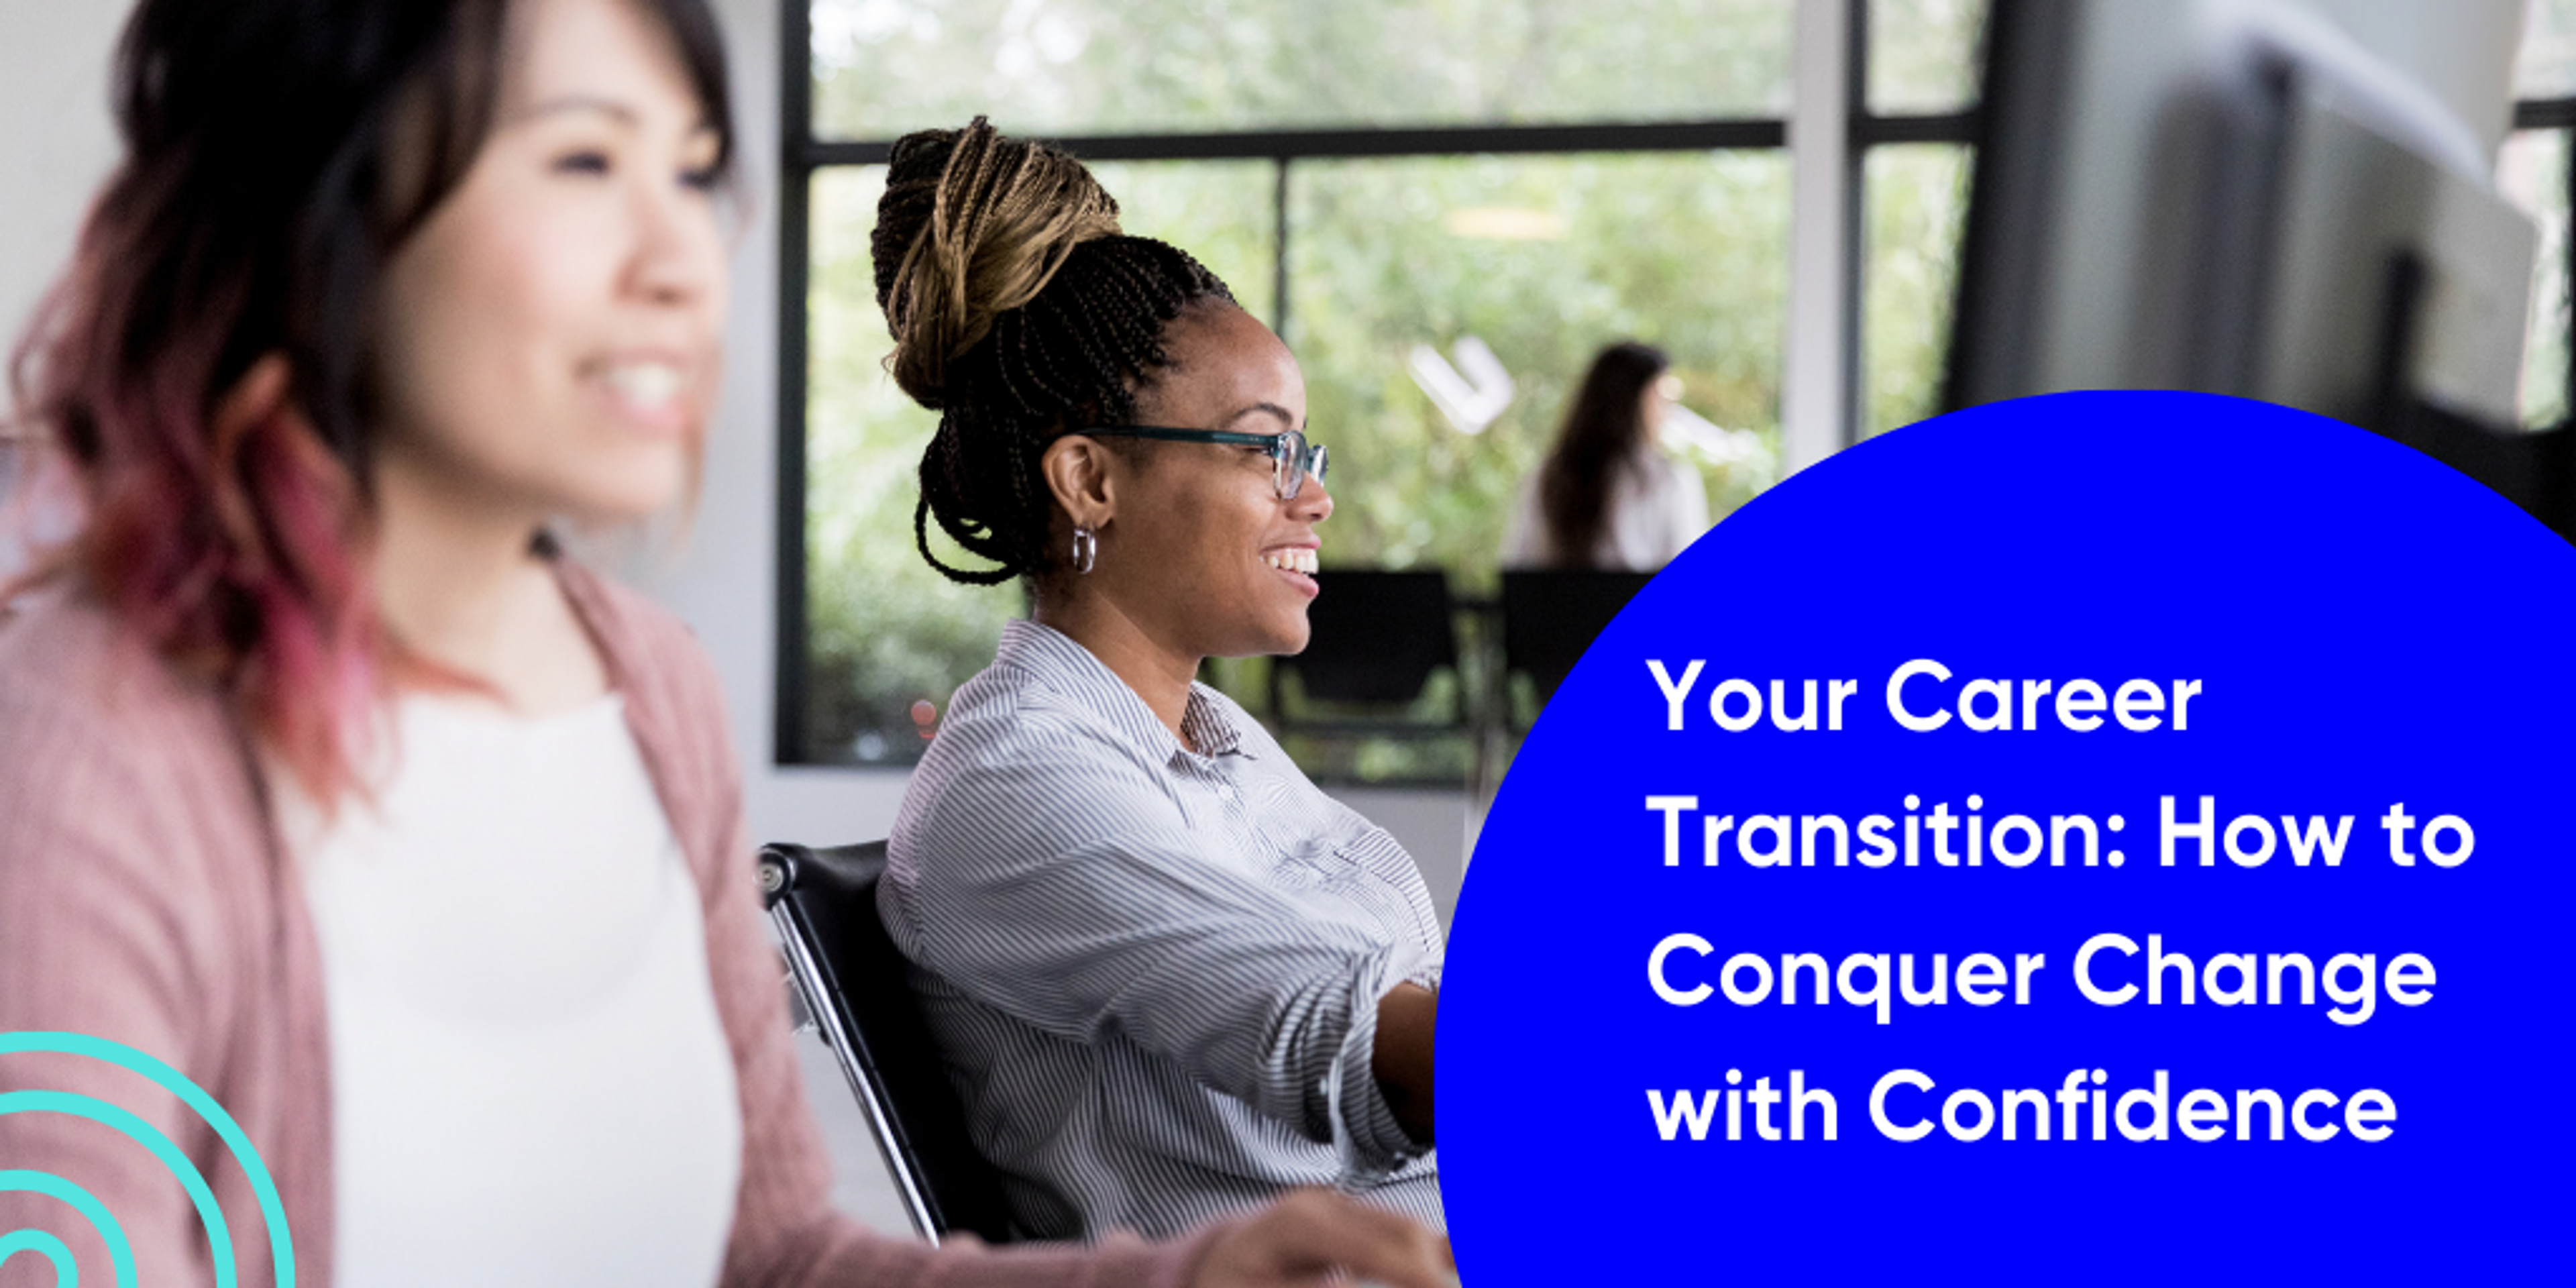 "Your Career Transition: How to Conquer Change with Confidence" with an image of two women sitting at their desks